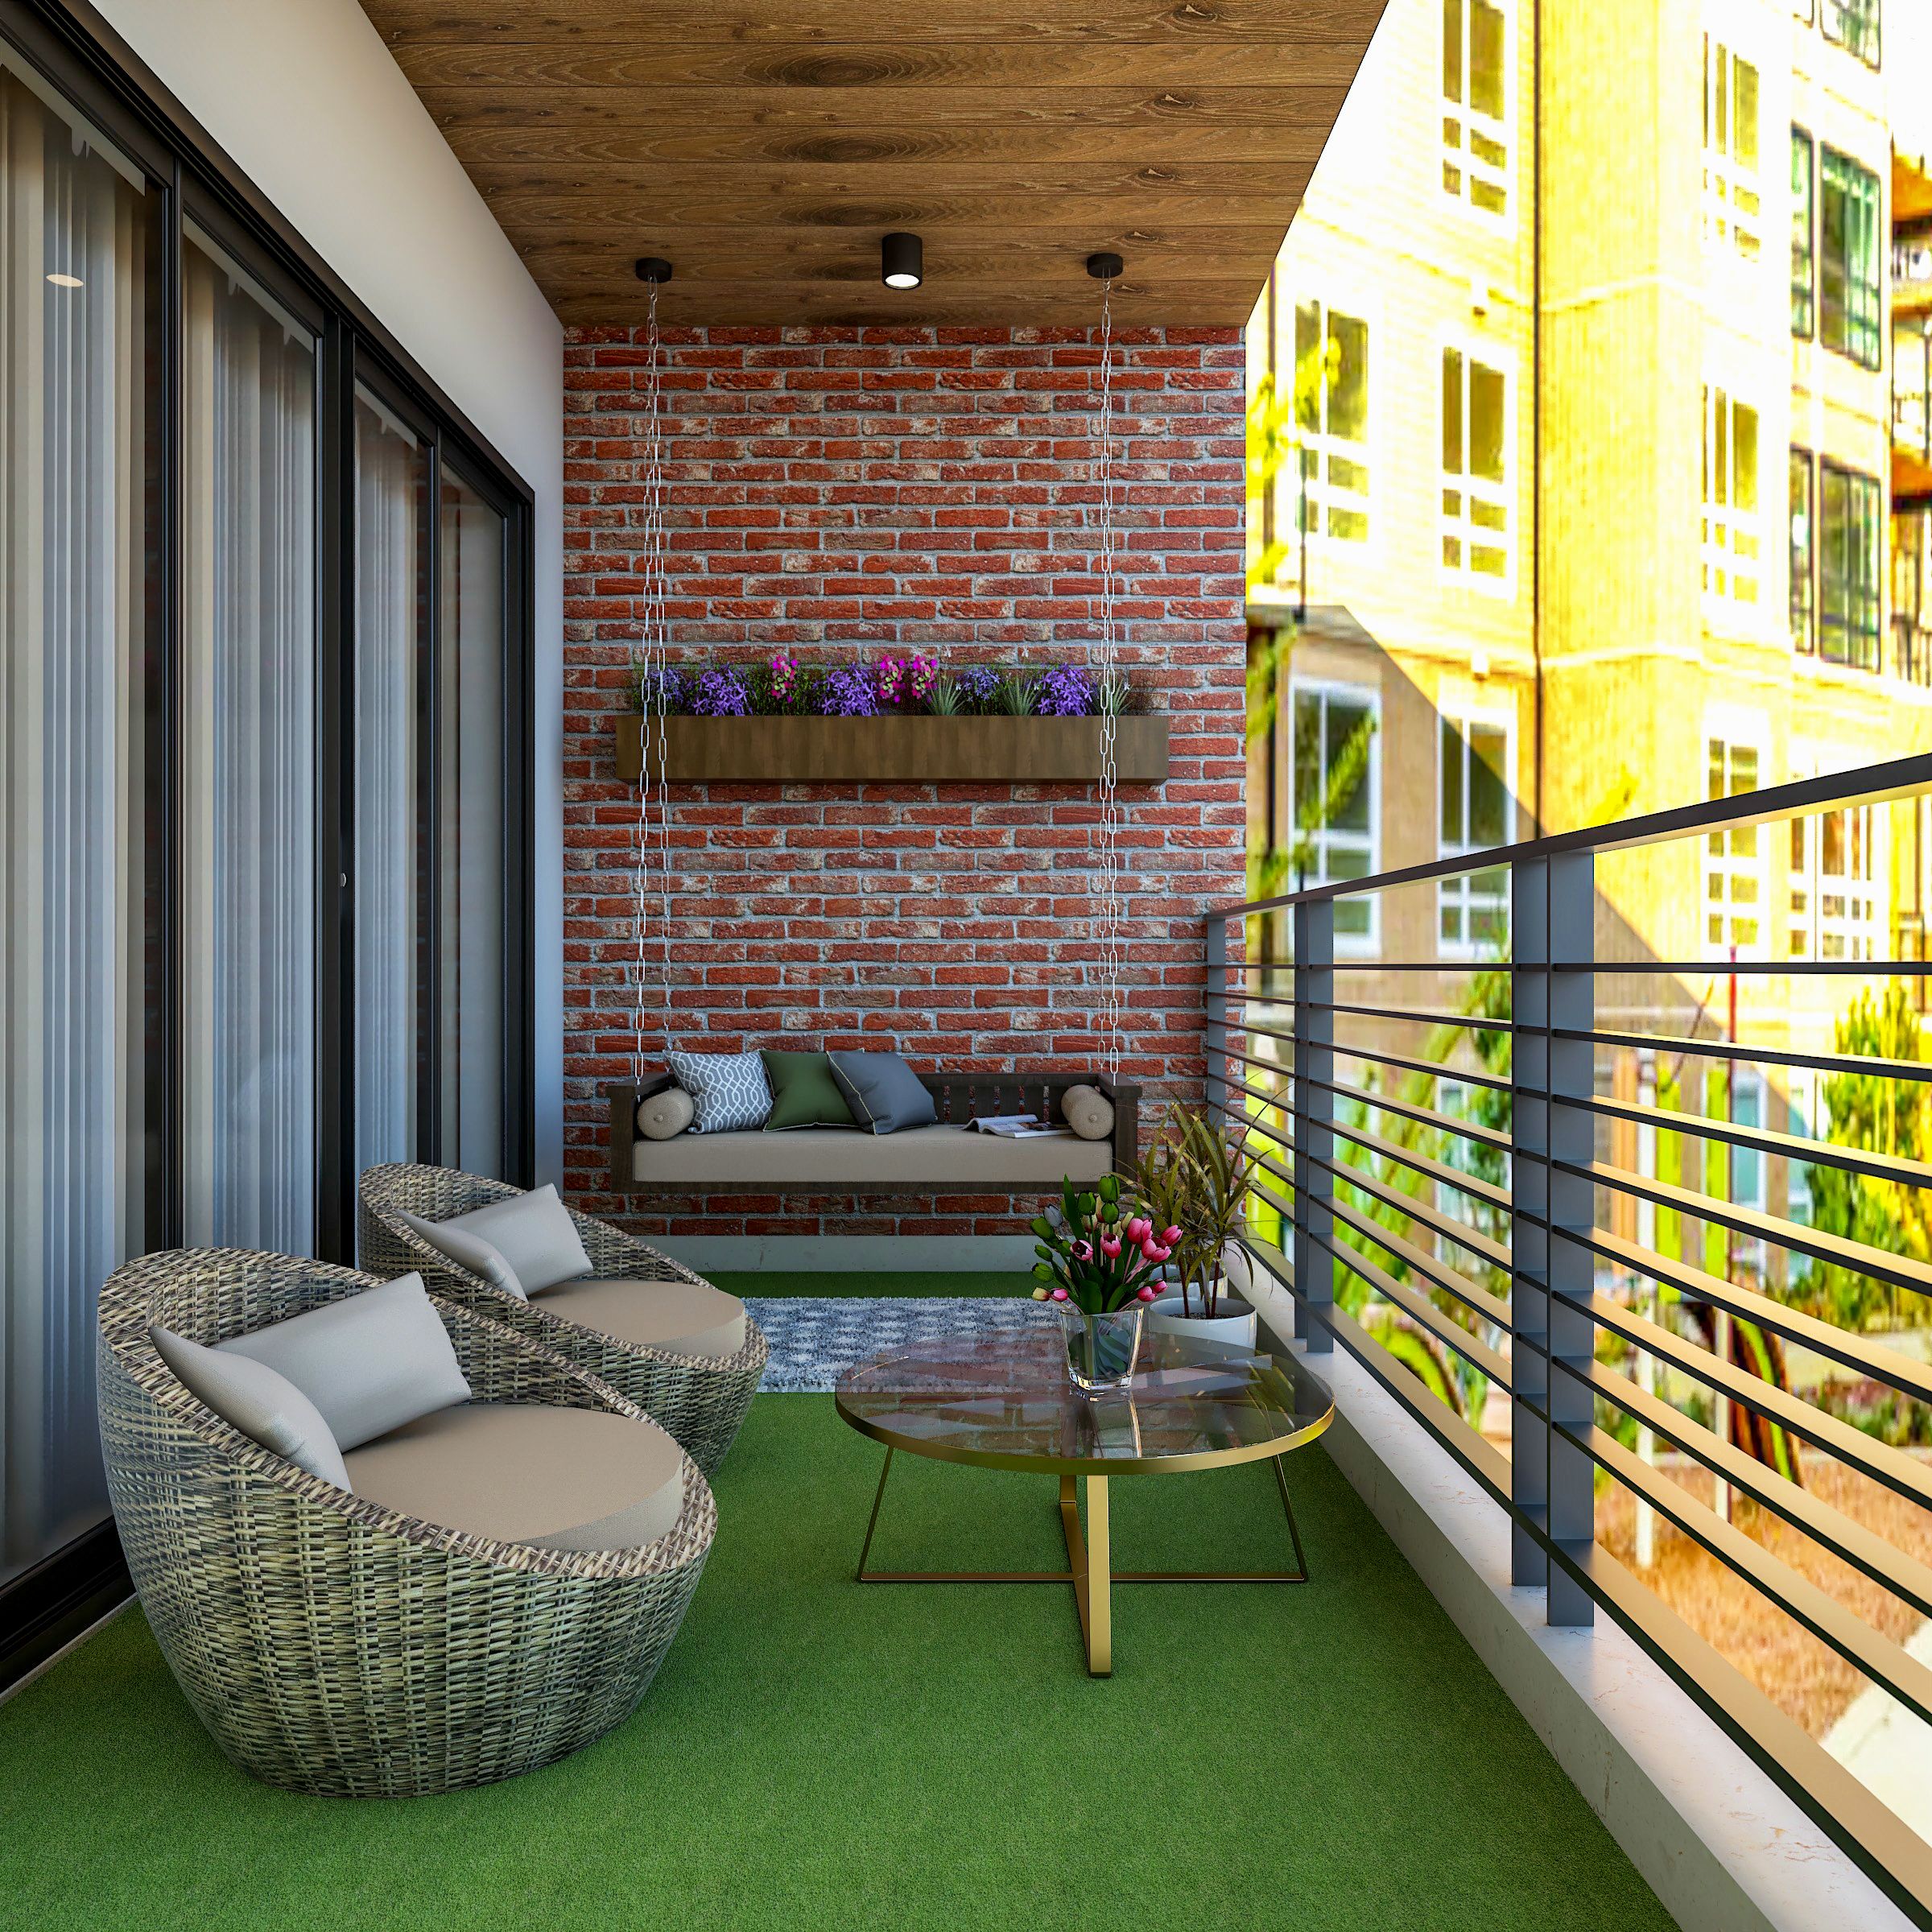 Contemporary Balcony Design With Red Brick Accent Wall